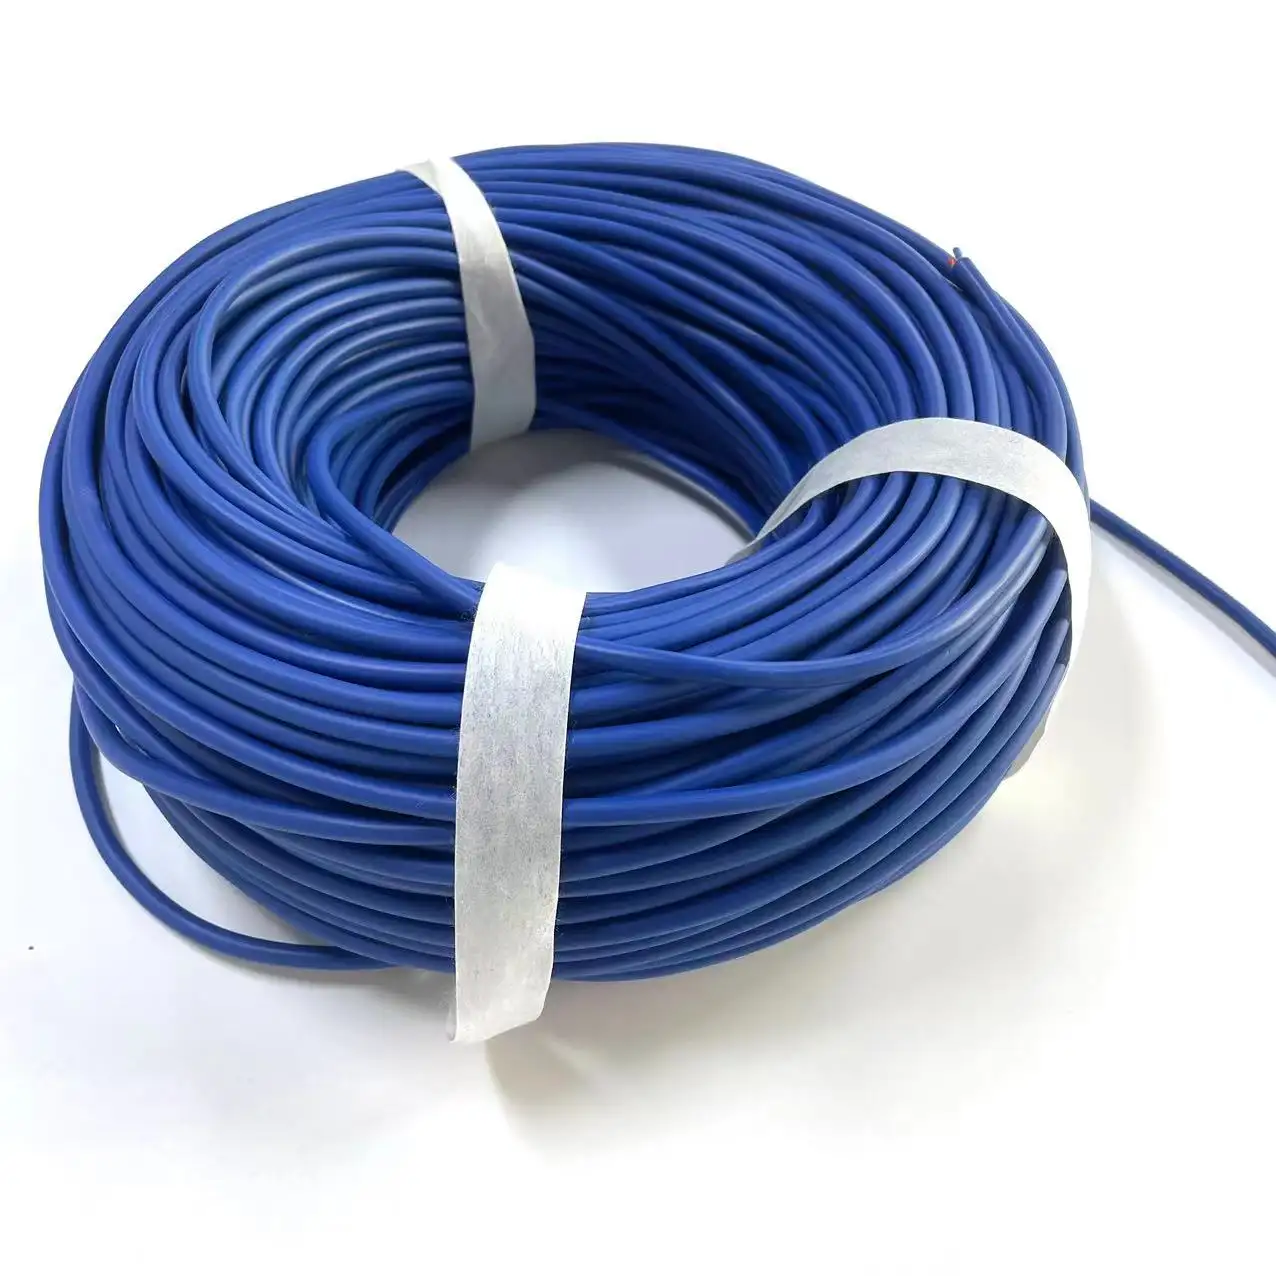 New product soft pvc cable 5x150mm2 4x35mm stripping pvc 1.5sqmm cable 4x1mm2 12mm2 500mm3 pvc cable